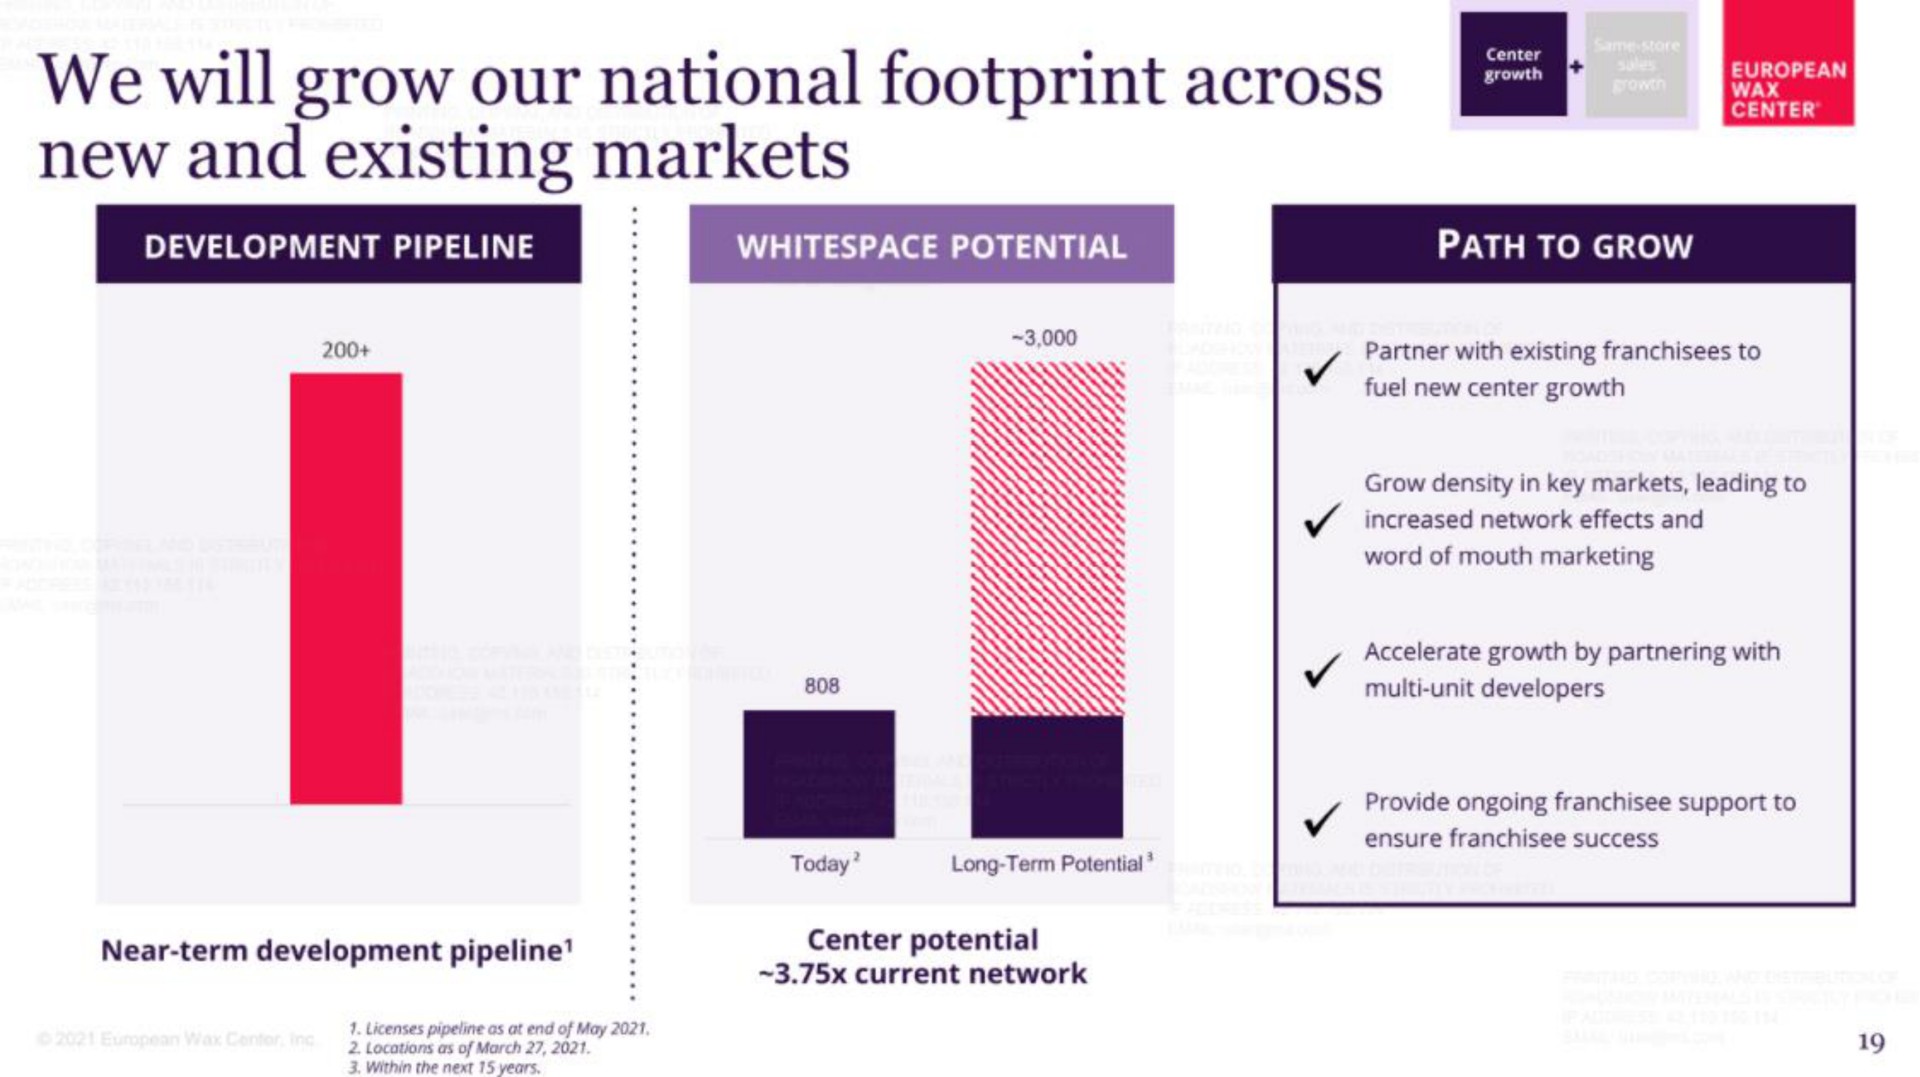 we will grow our national footprint across new and existing markets | European Wax Center